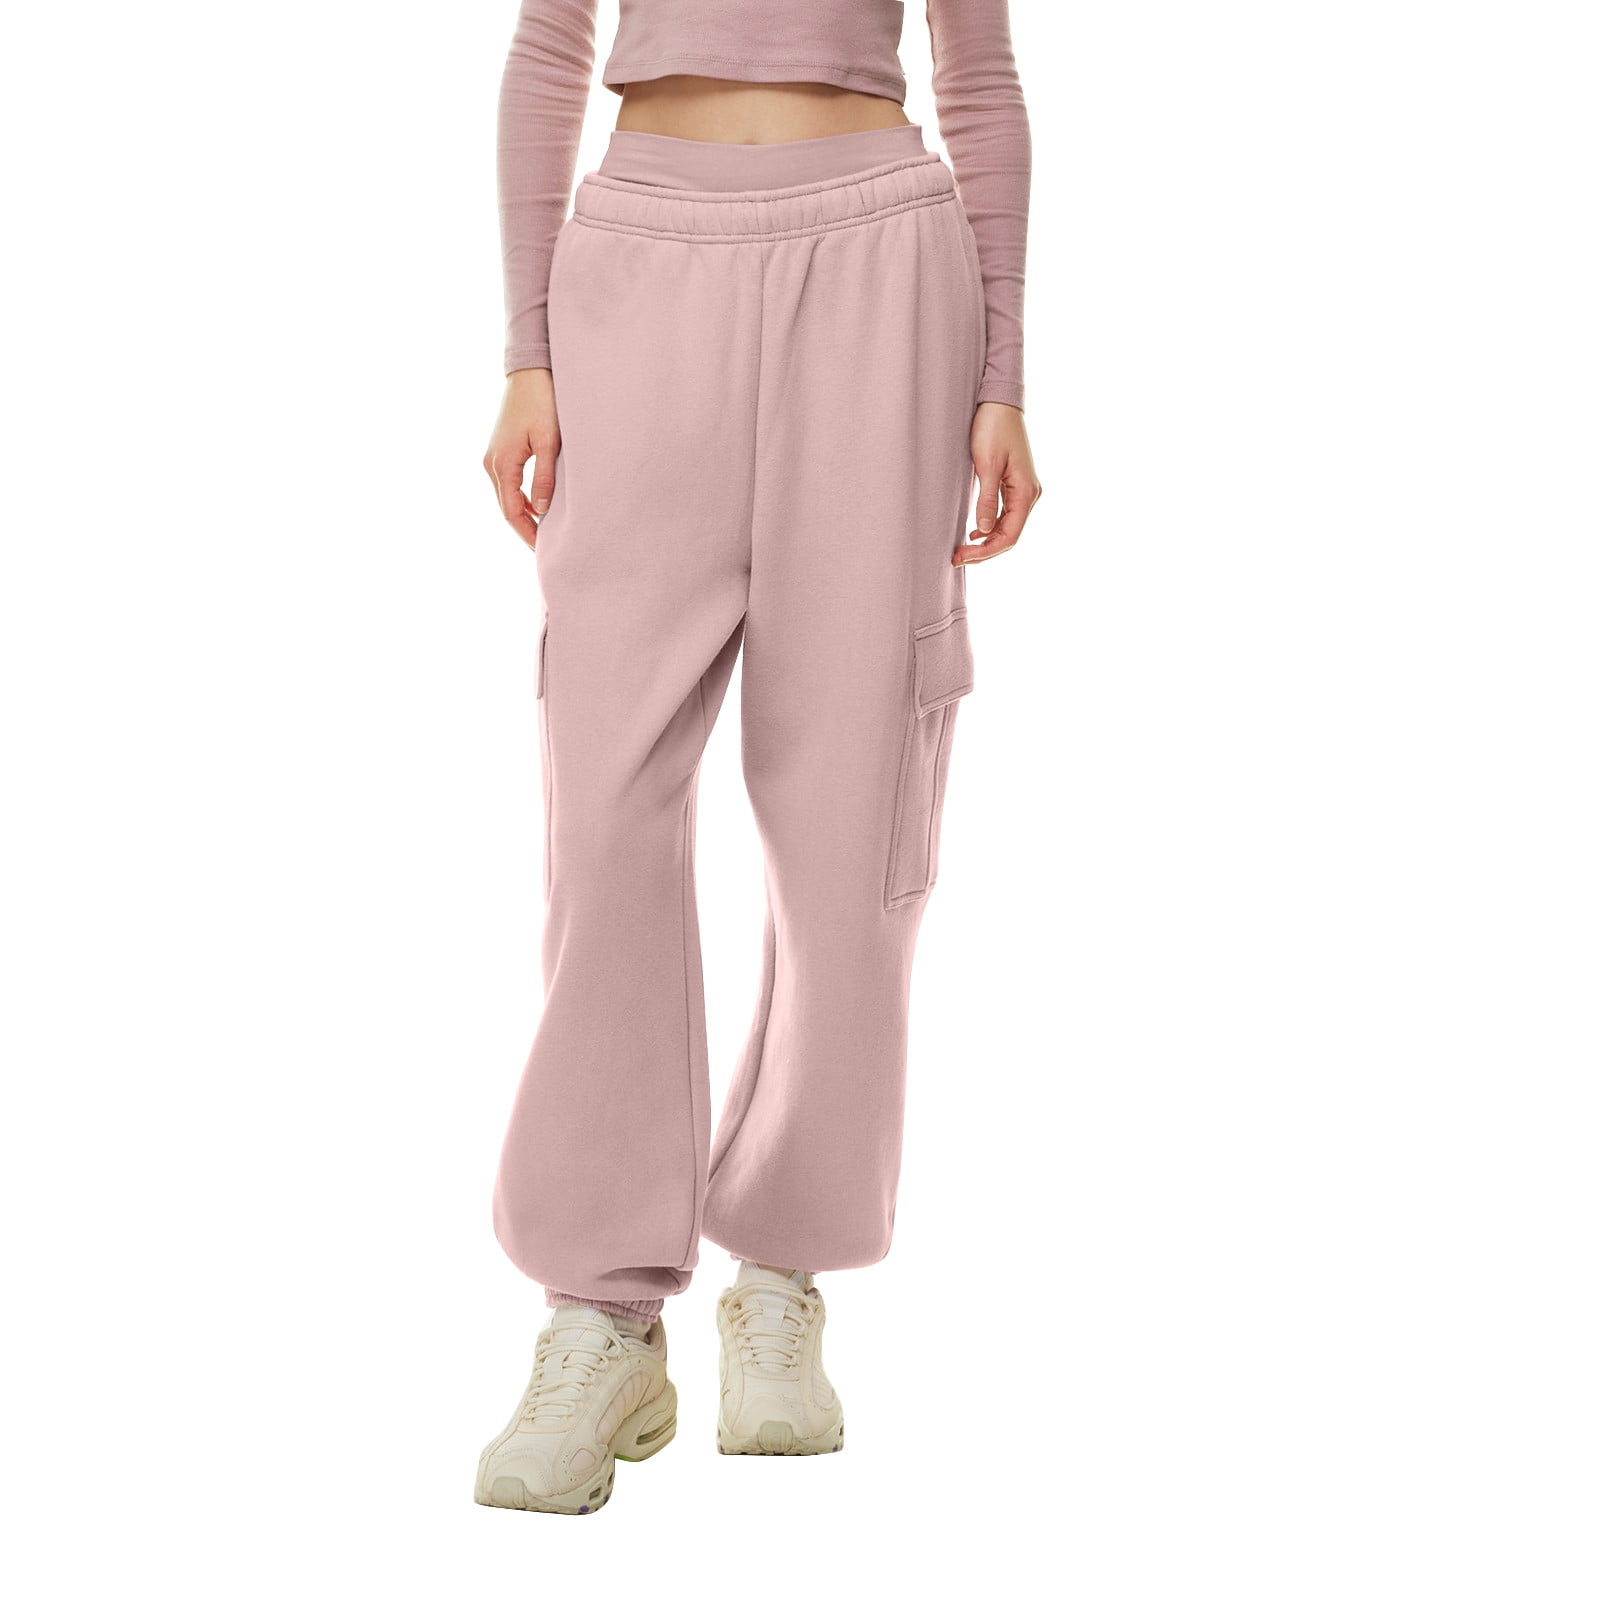 Cotton sweatpants with drawstring - Pants and cargo pants - BSK Teen